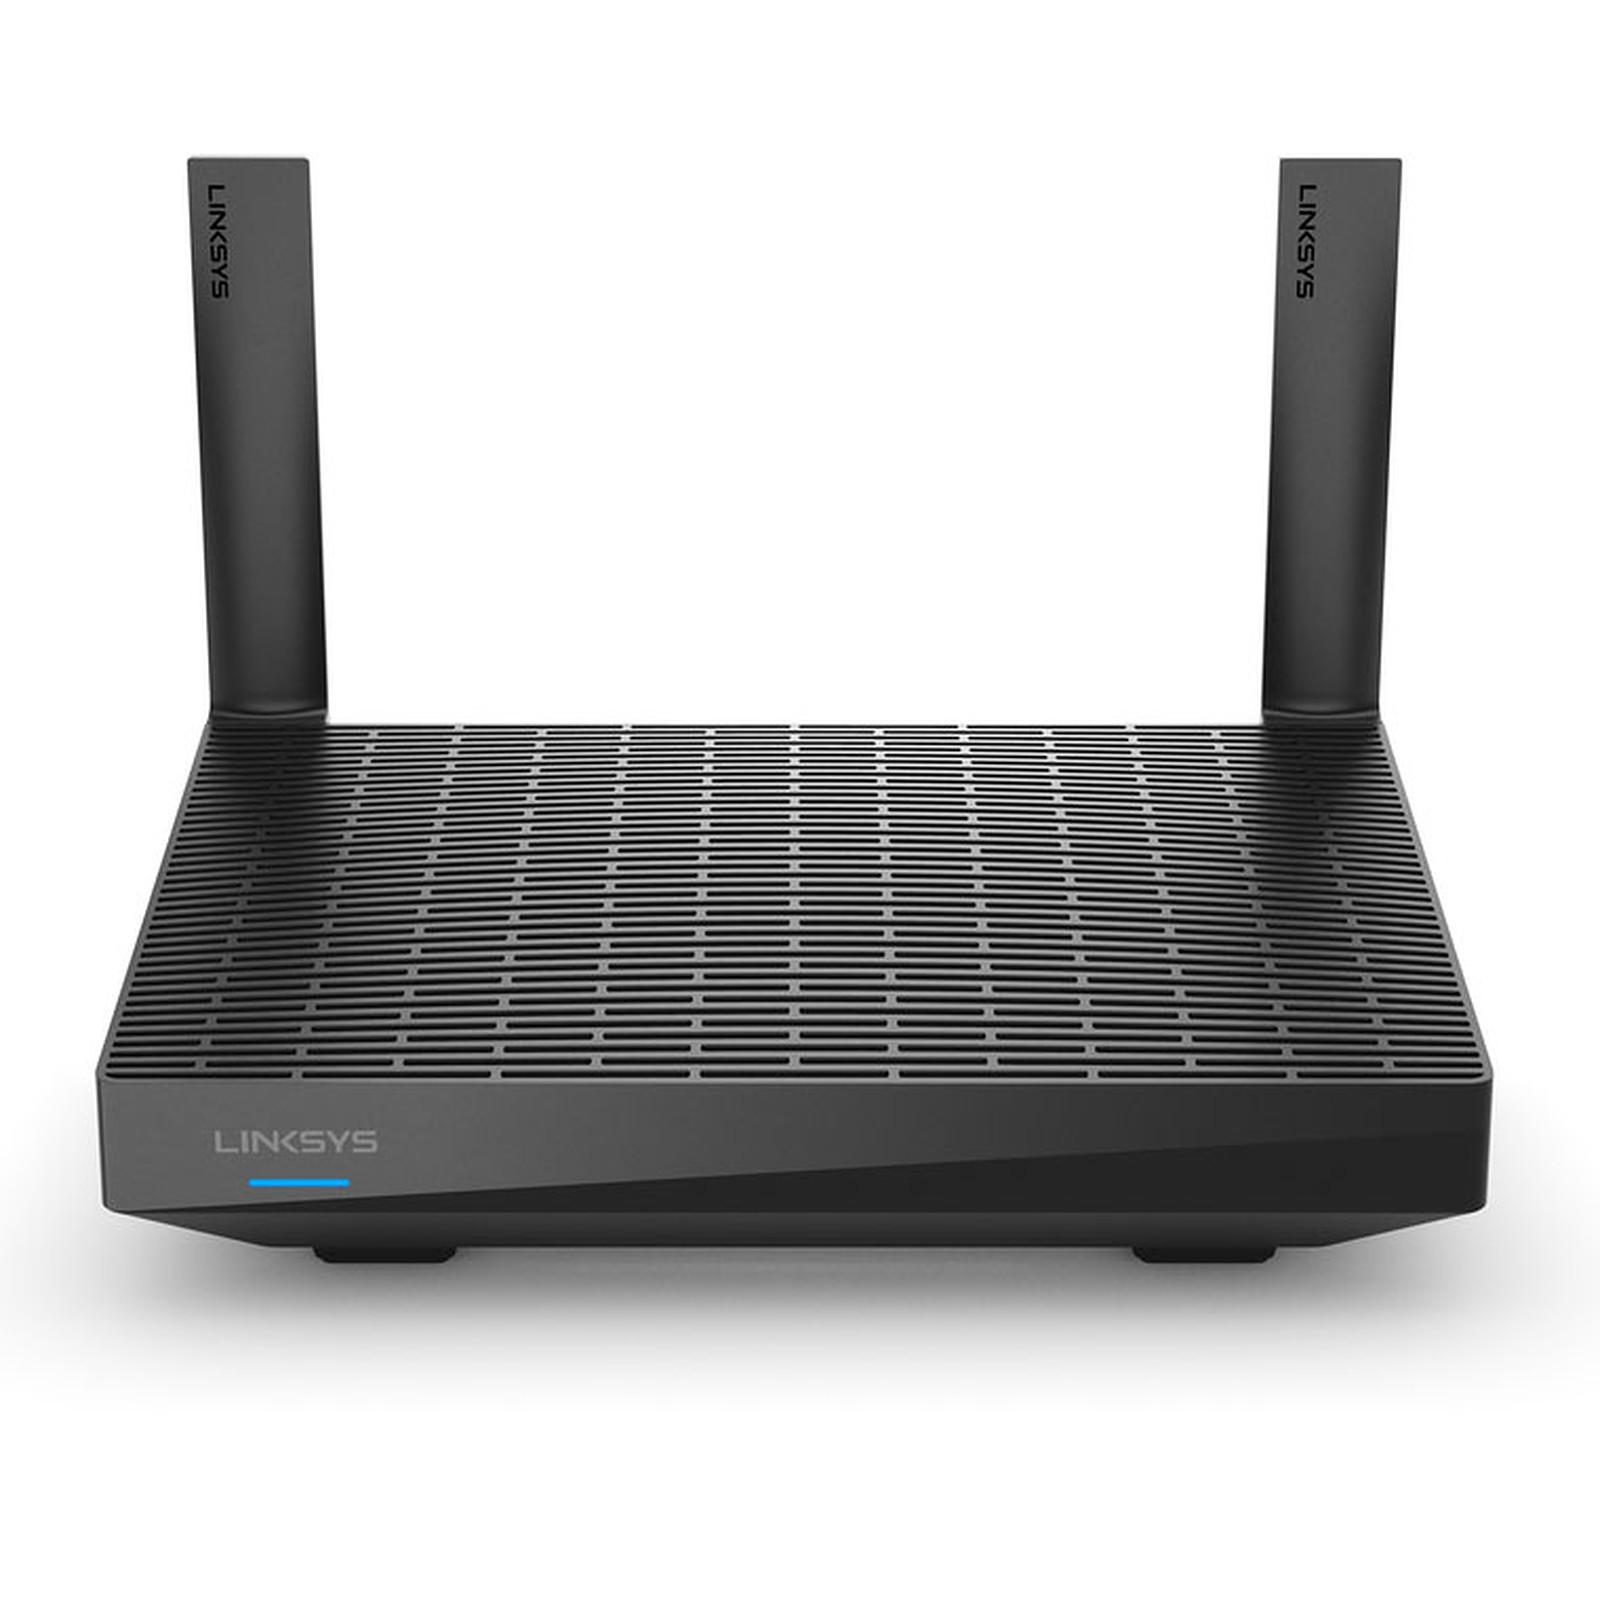 LINKSYS MR7350 AX1800 MESH WIFI 6 ROUTER